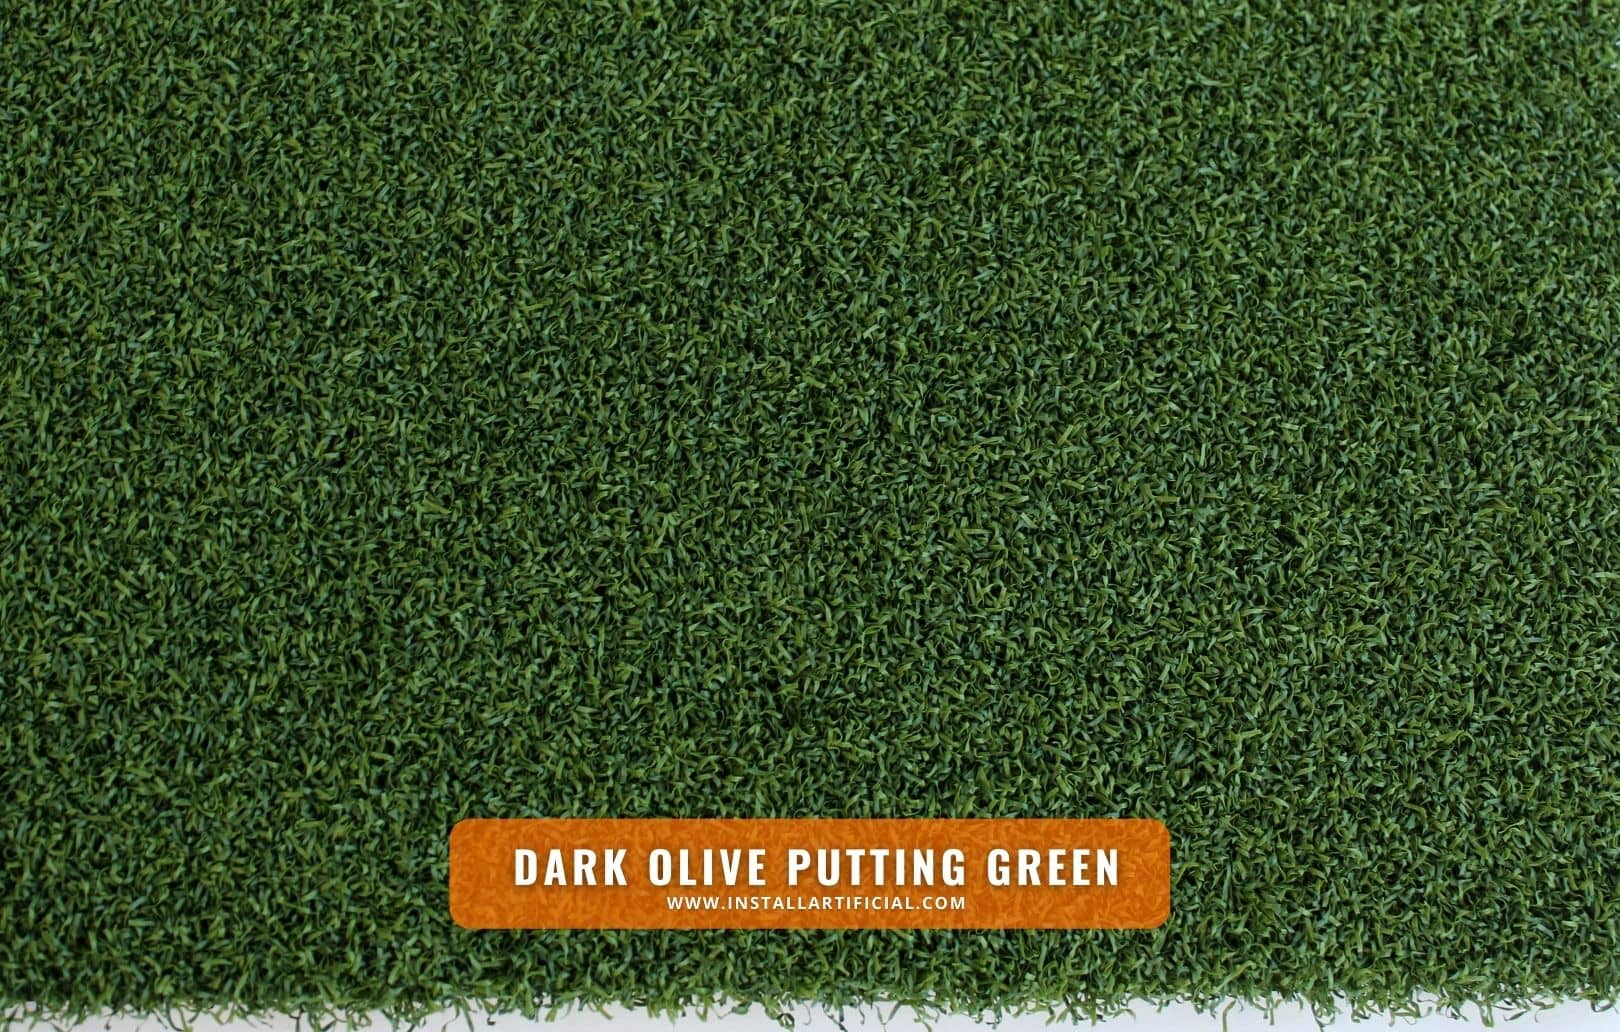 Dark Olive Putting Green, Purchase Green, top